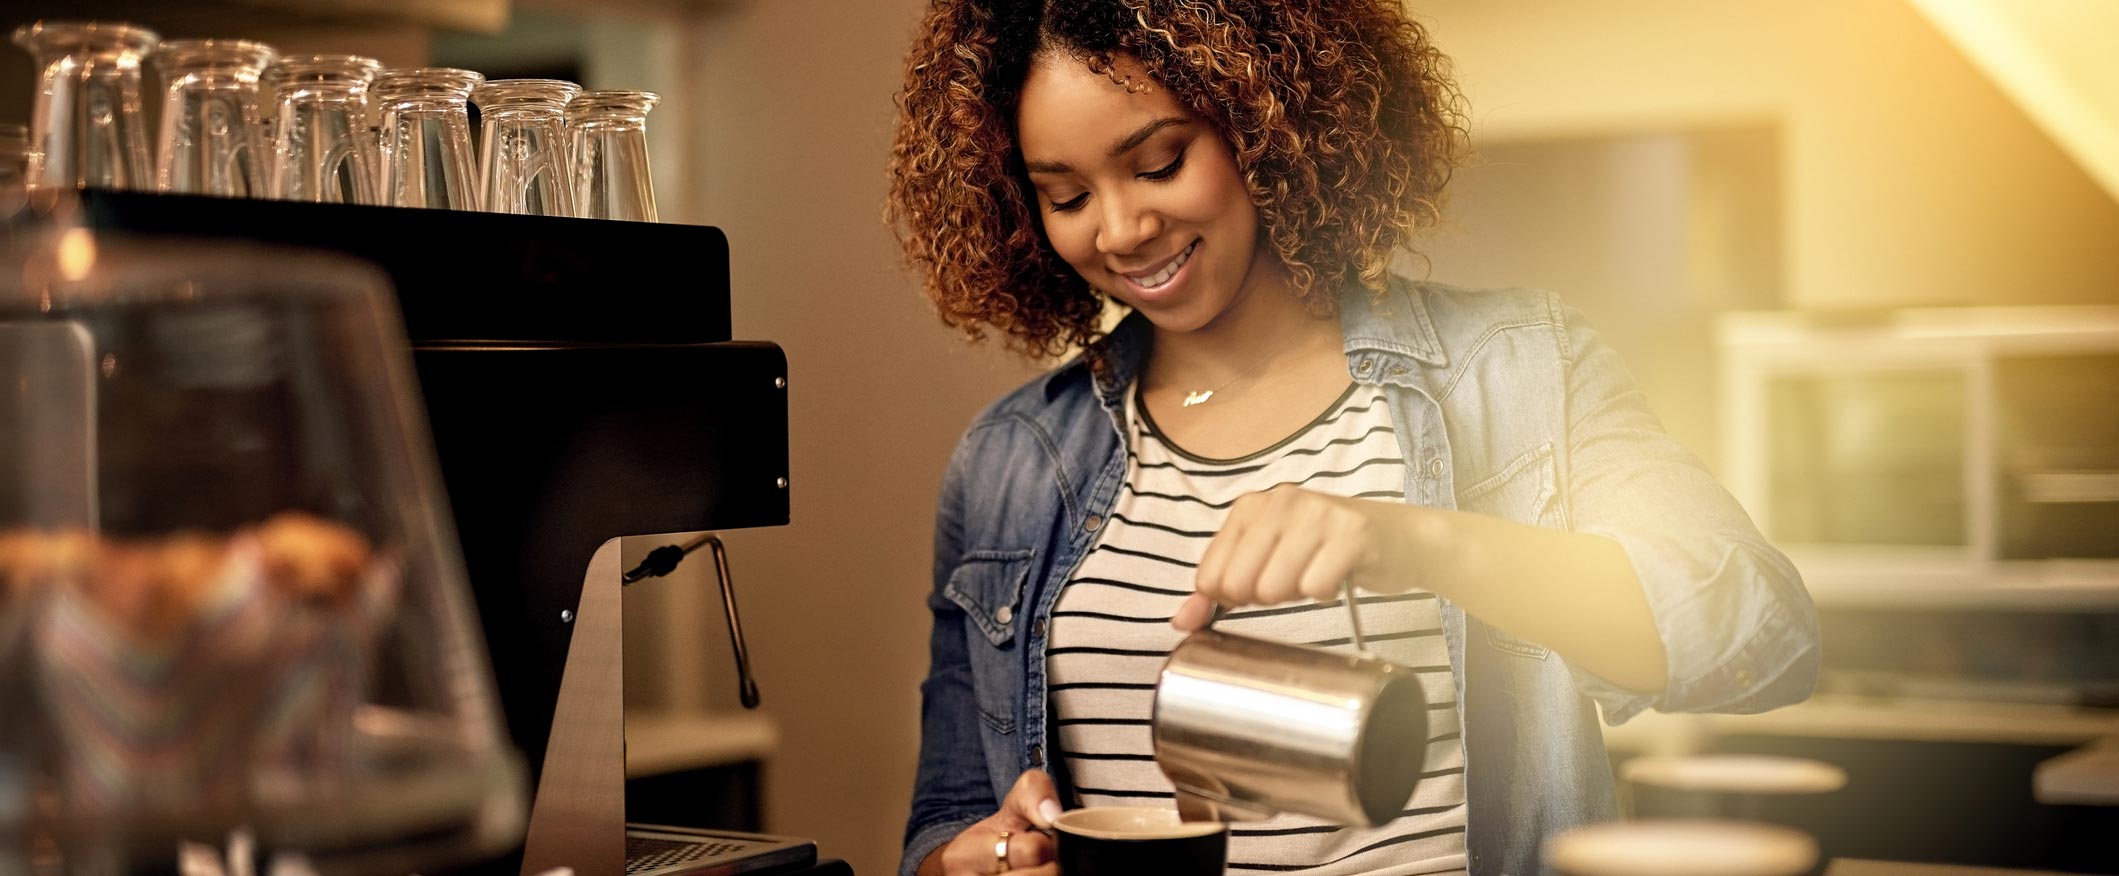 Female business owner pouring coffee